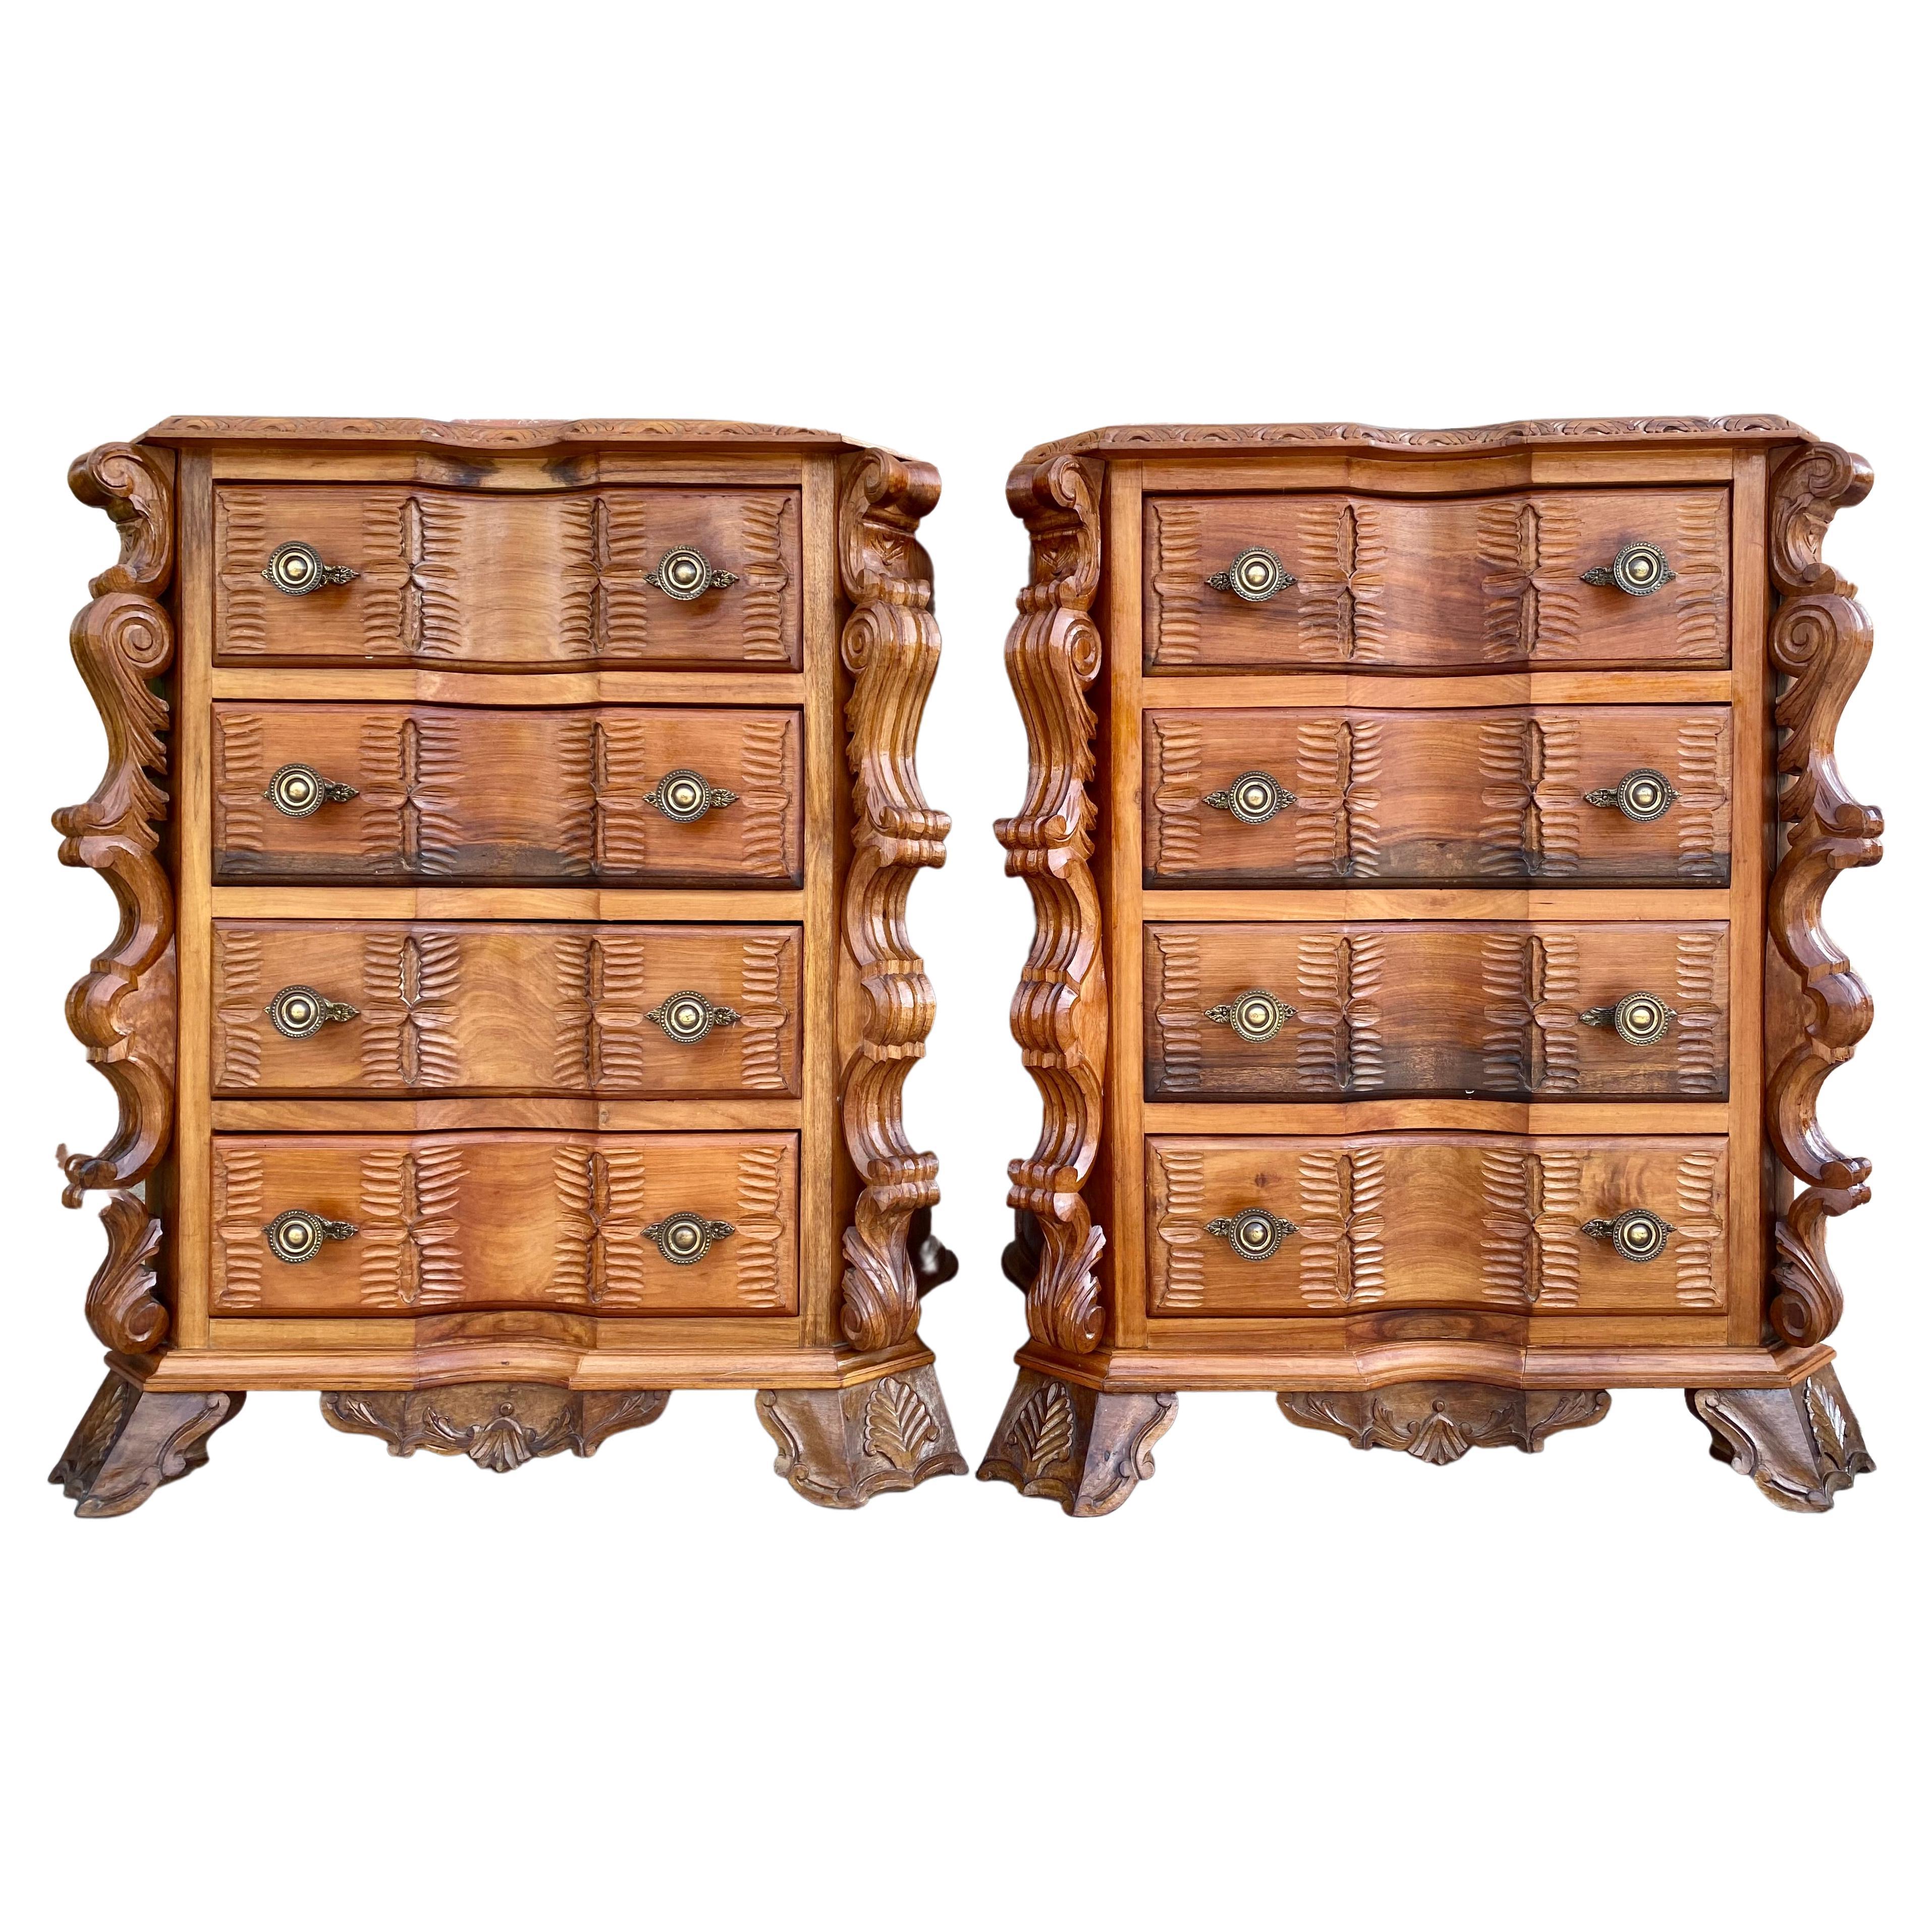 Early 20th Century Italian Burl Walnut and Fruitwood Bedside Commodes, Set of 2 For Sale